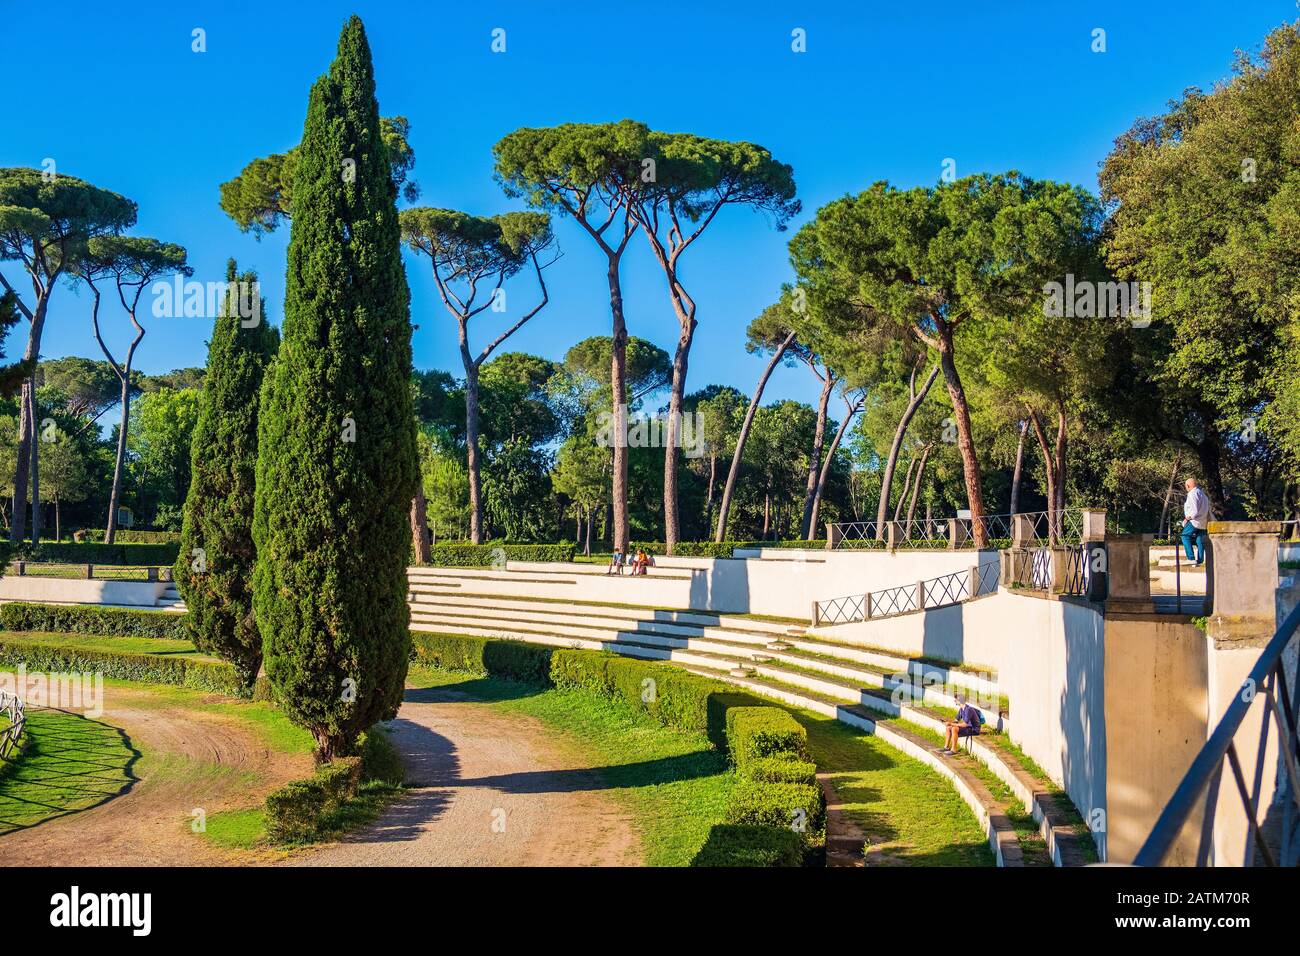 Rome, Italy - 2019/06/16: Piazza di Siena square, wide arena and outdoor park, within the Villa Borghese park complex in the historic quarter Pinciano Stock Photo